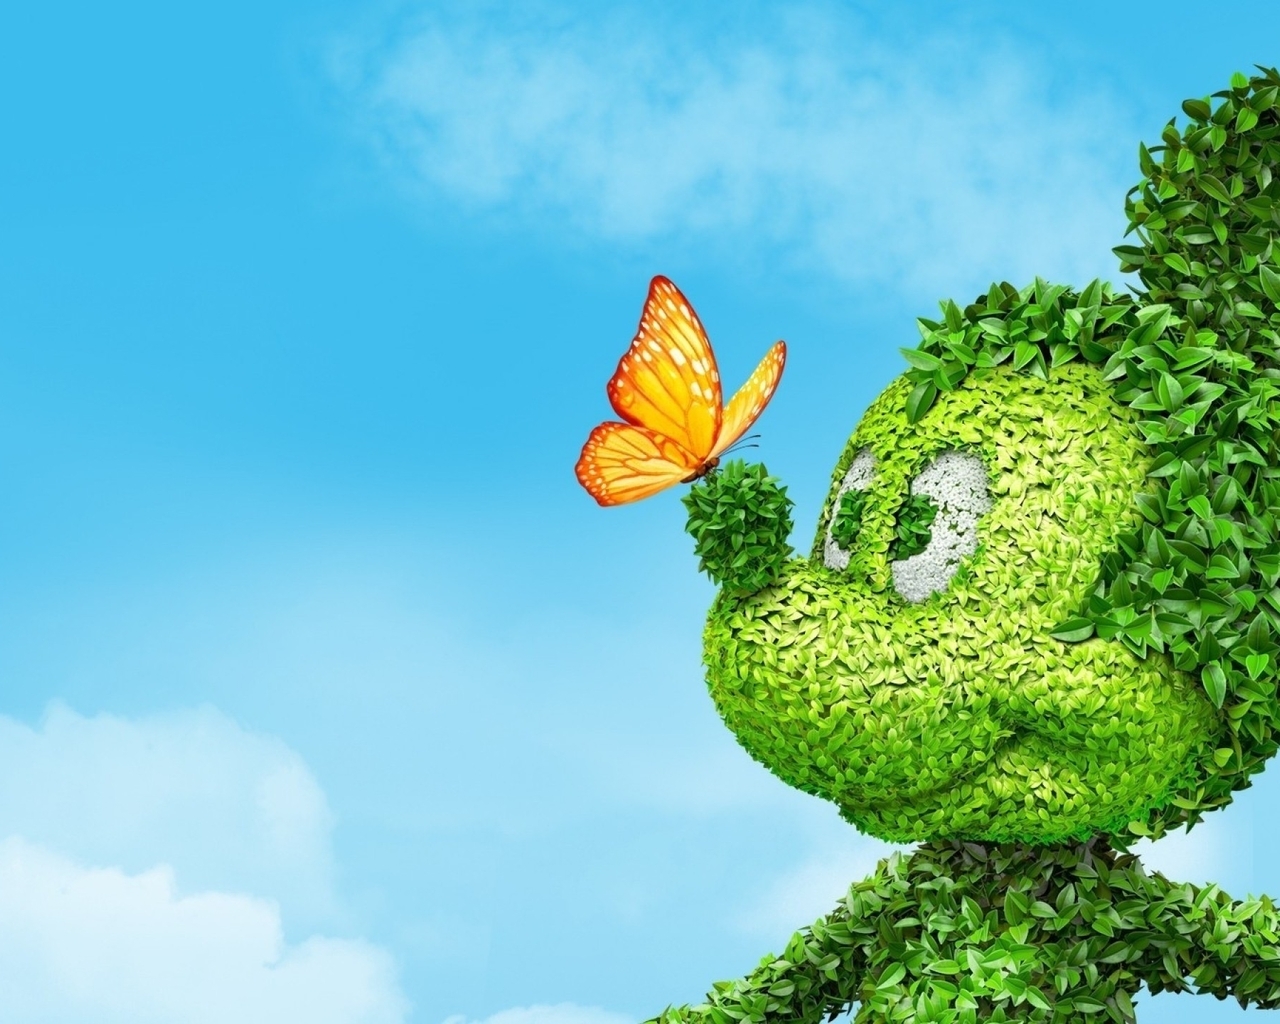 Image: Mickey mouse, leaves, butterfly, sky